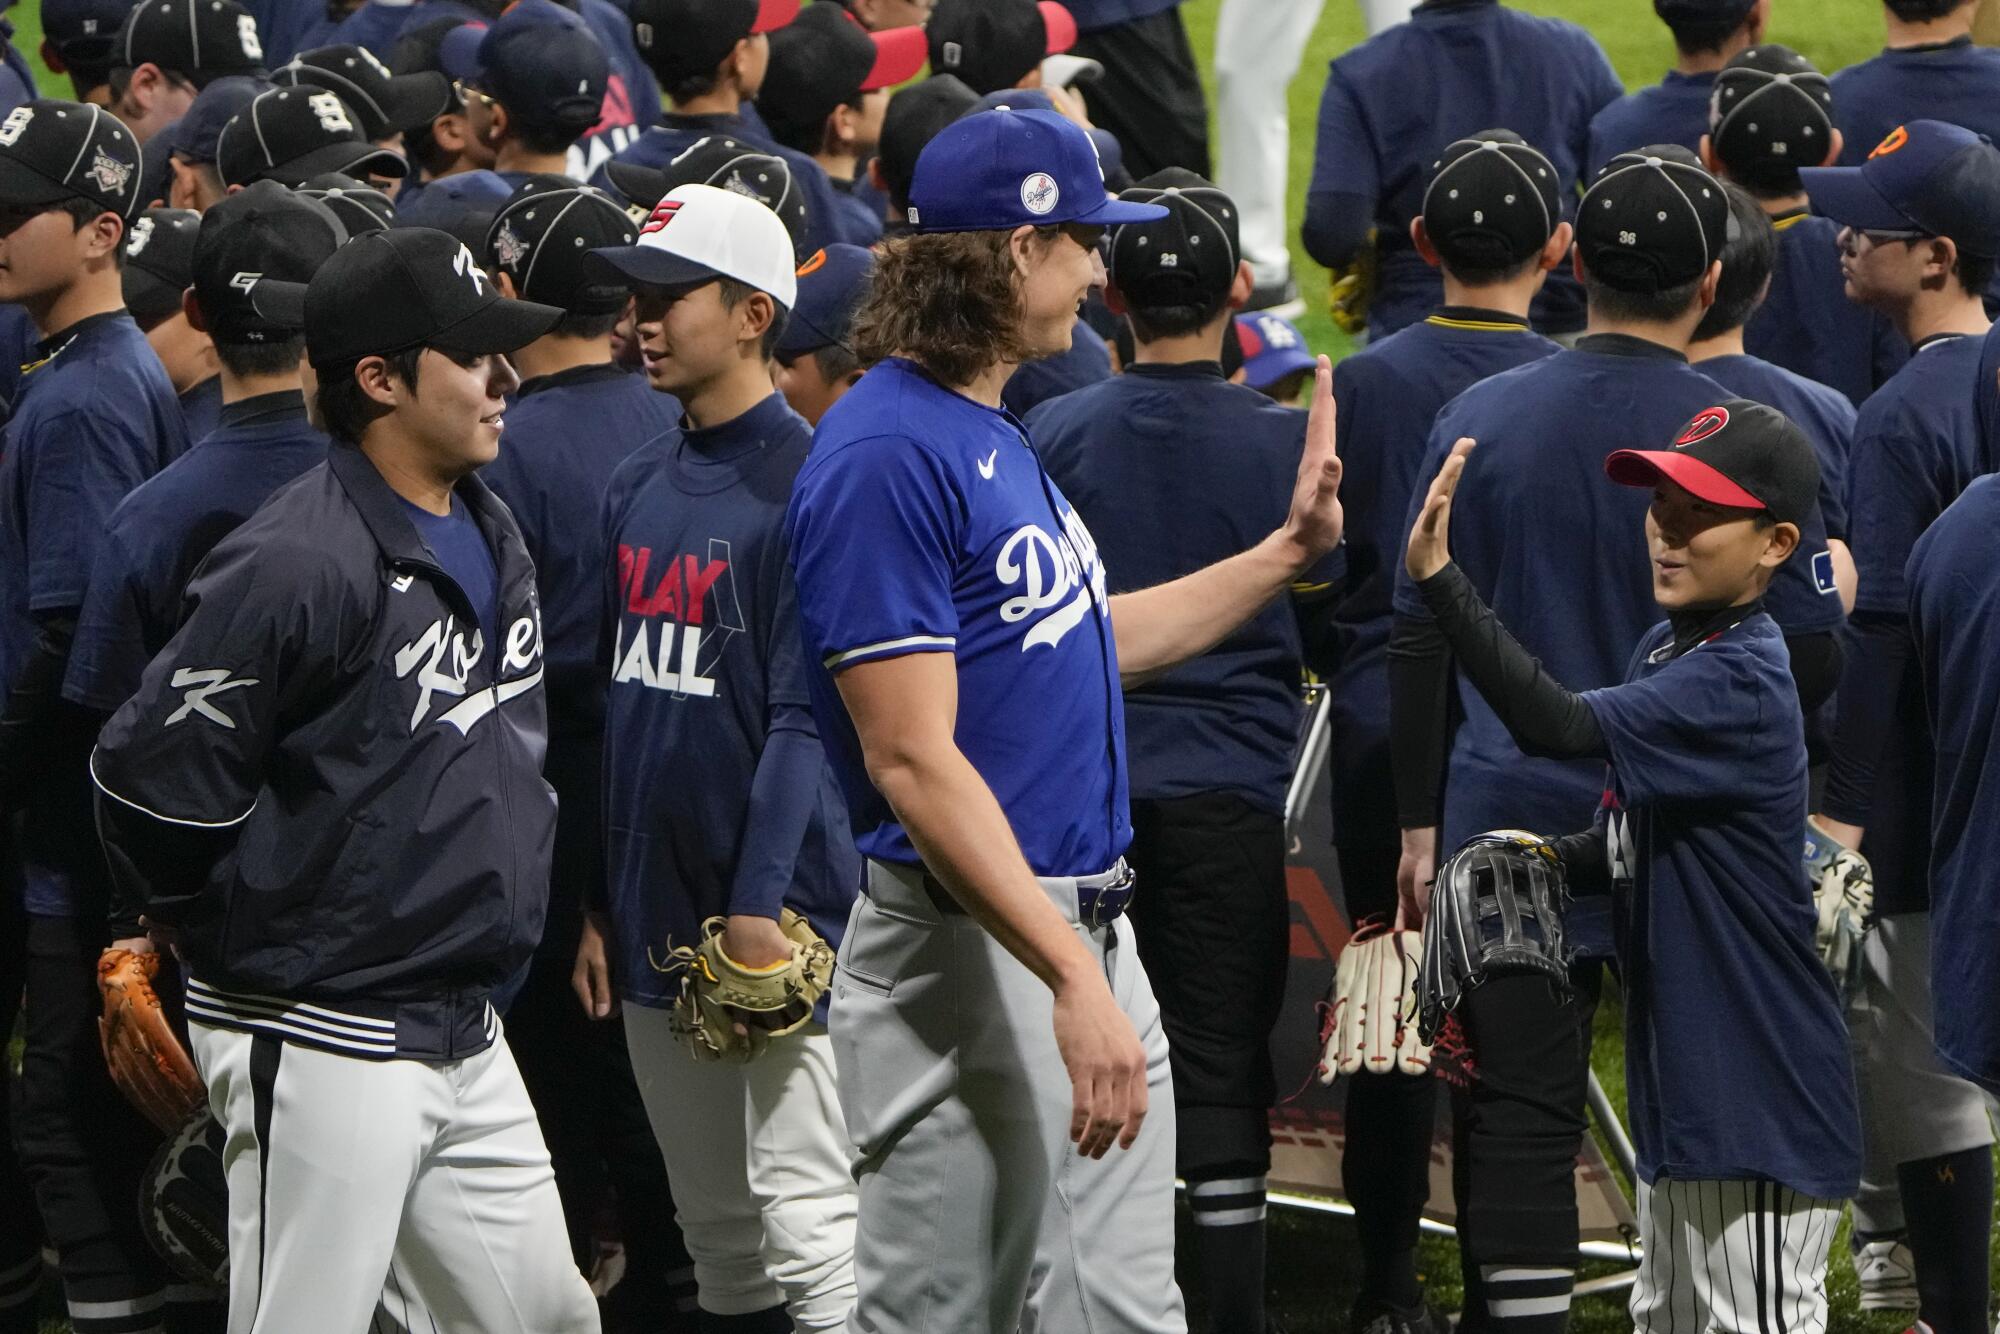 Tyler Glasnow, center, is greeted by a young fan during a skills clinic at Gocheok Sky Dome in Seoul, on March 16.